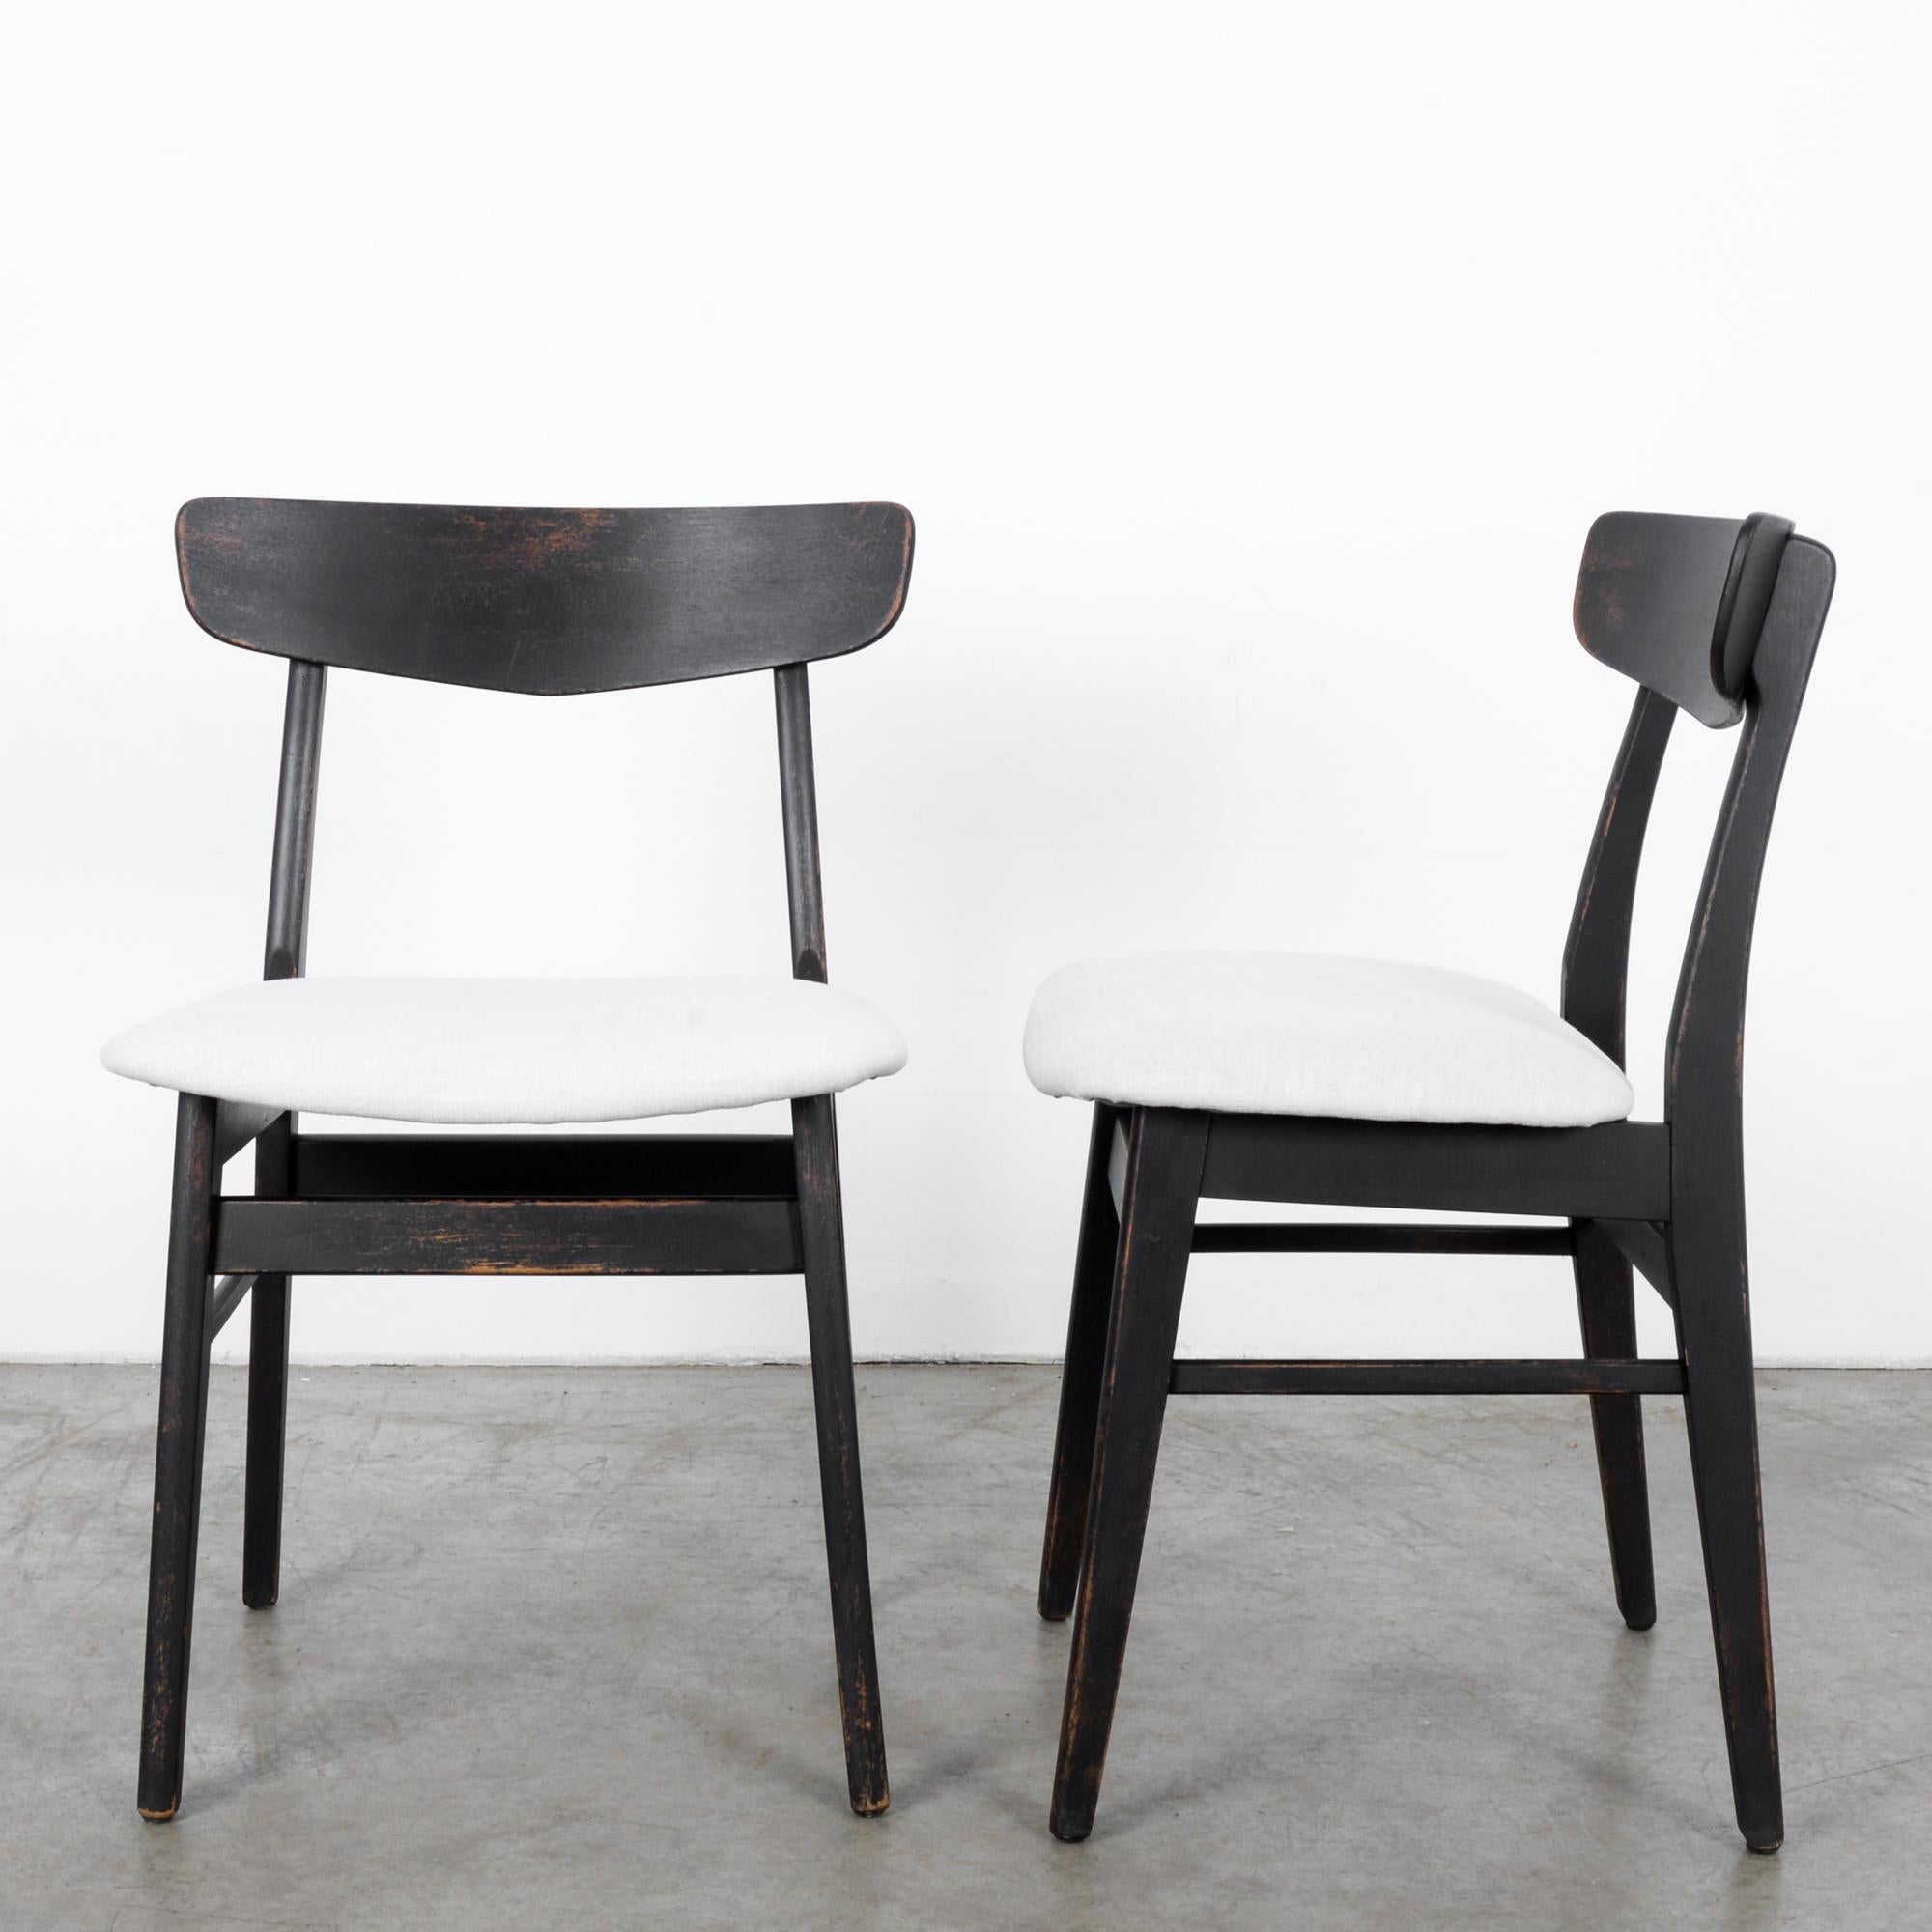 Mid-20th Century 1960s Danish Upholstered Black Chairs, a Pair